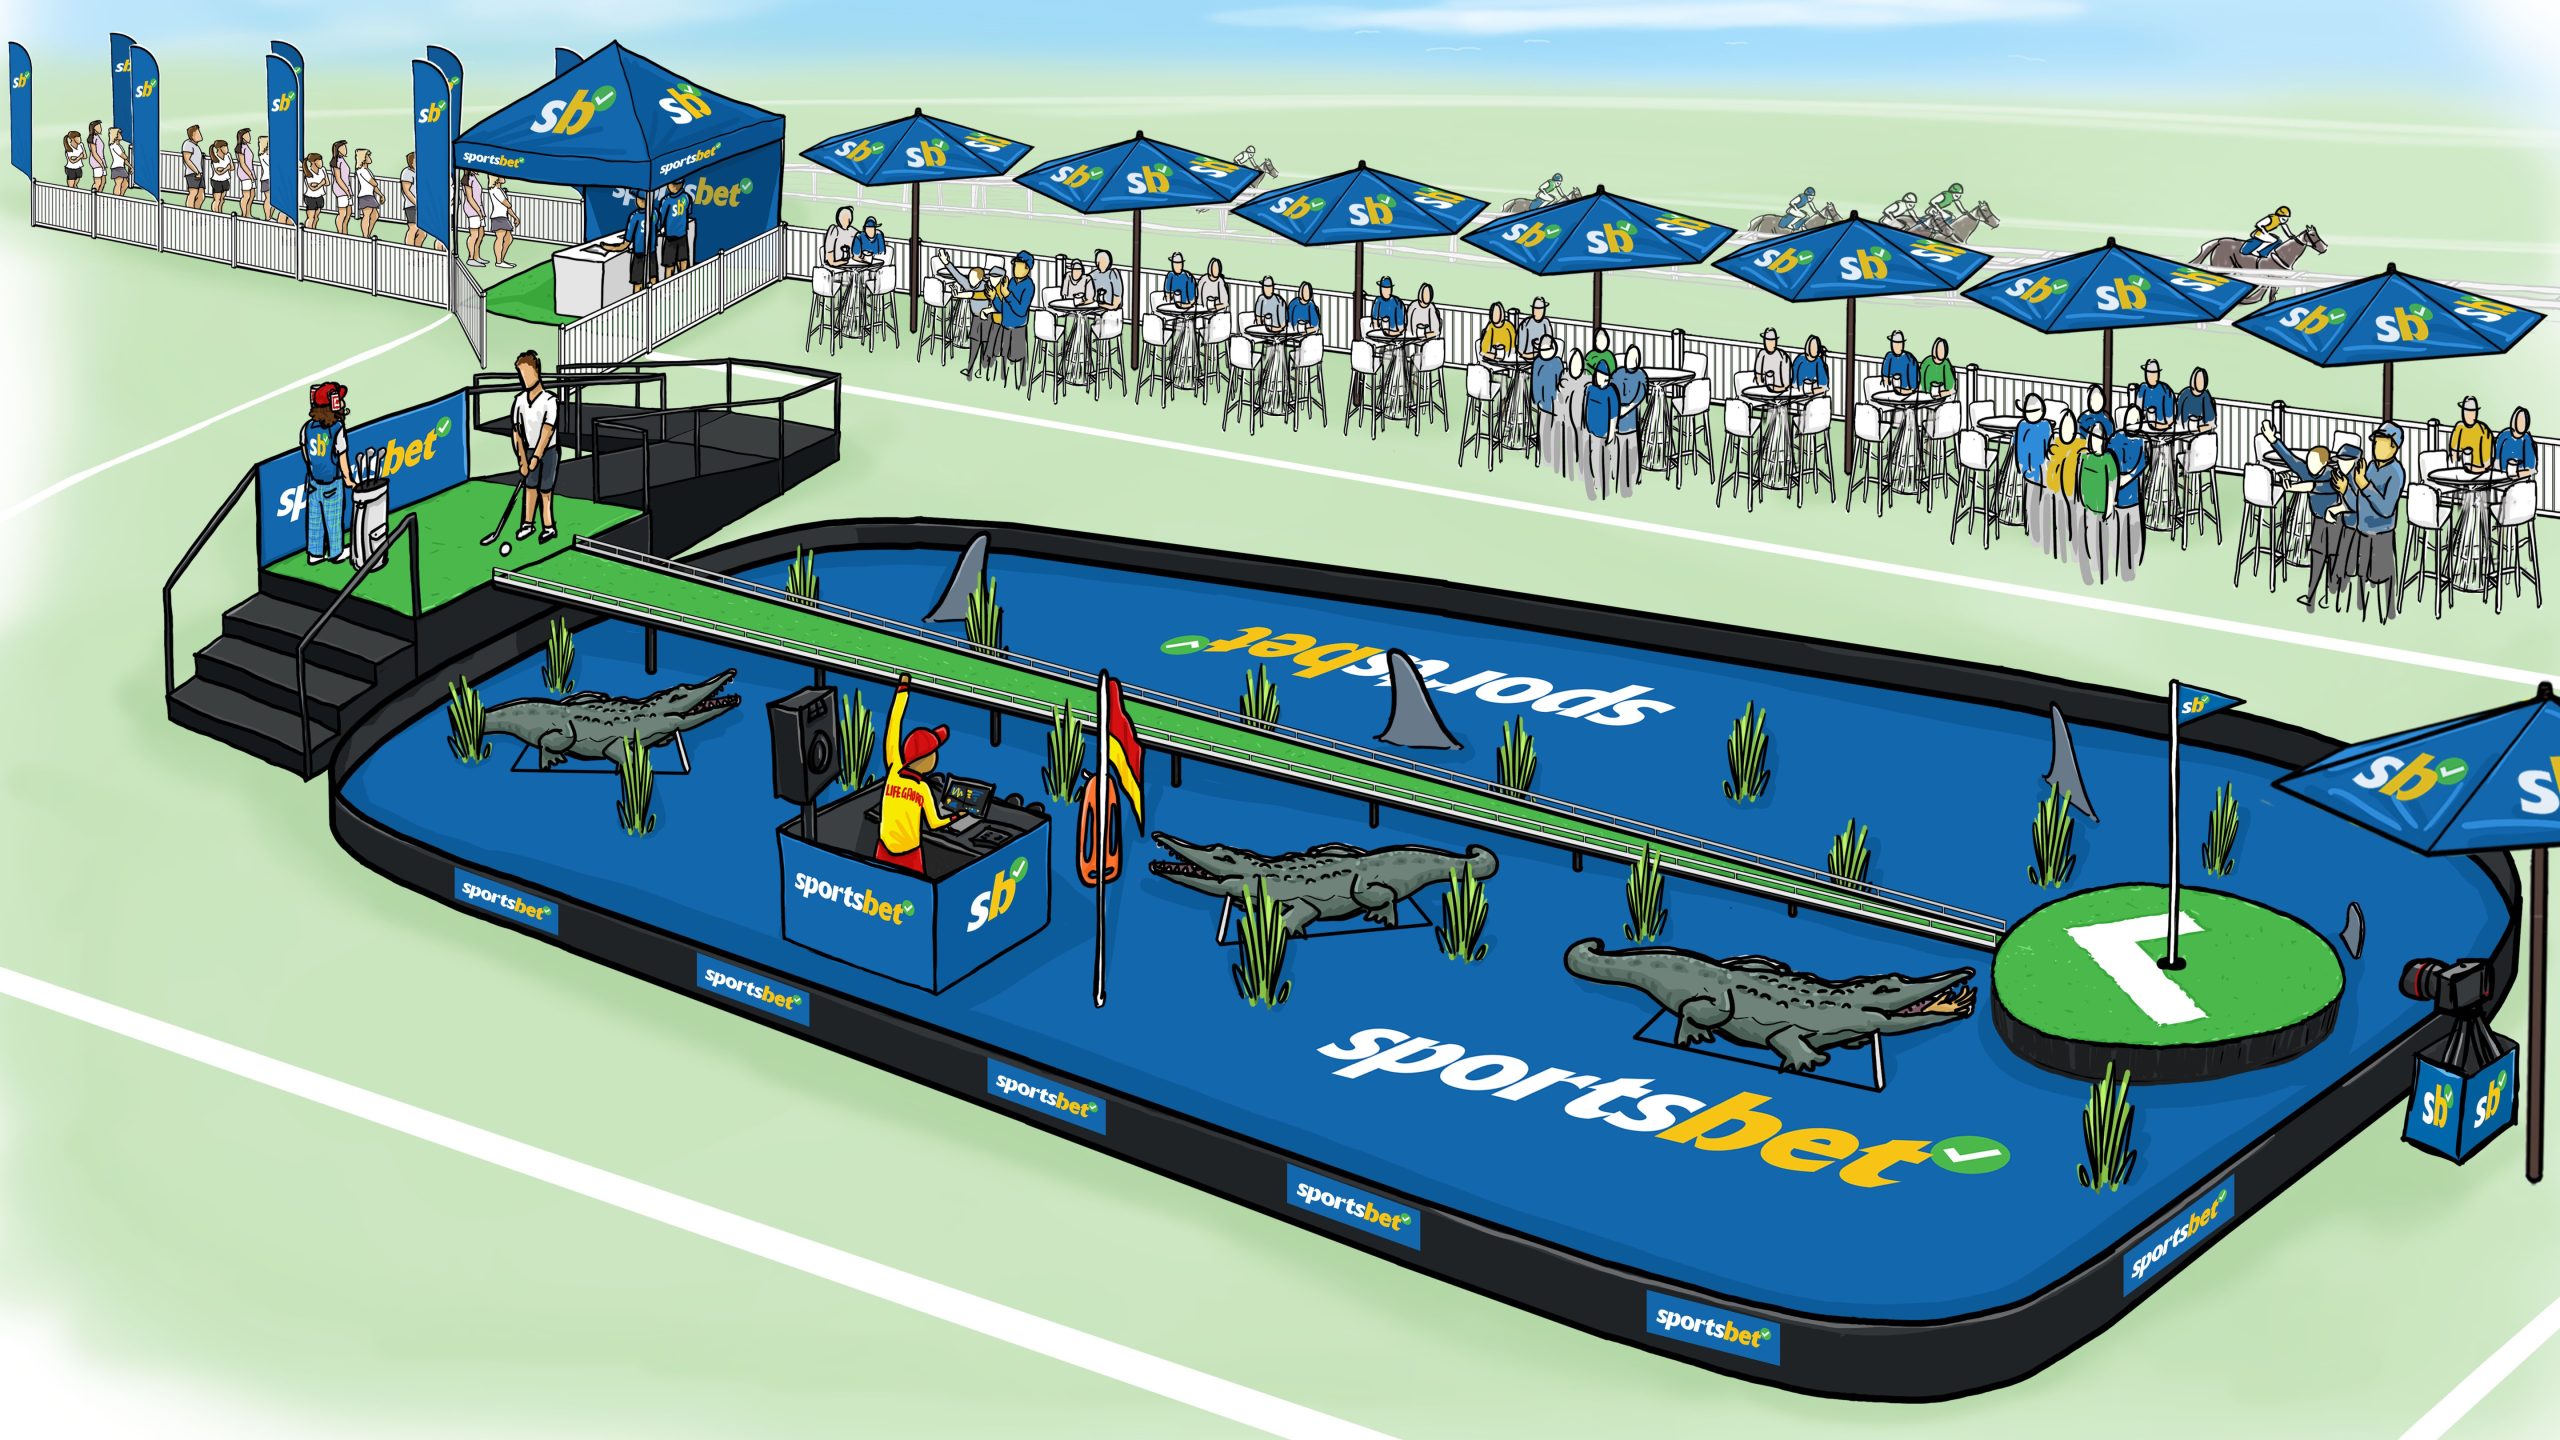 Sportsbet putting activation for the 2024 Adelaide Racing Carnival at Morphettville